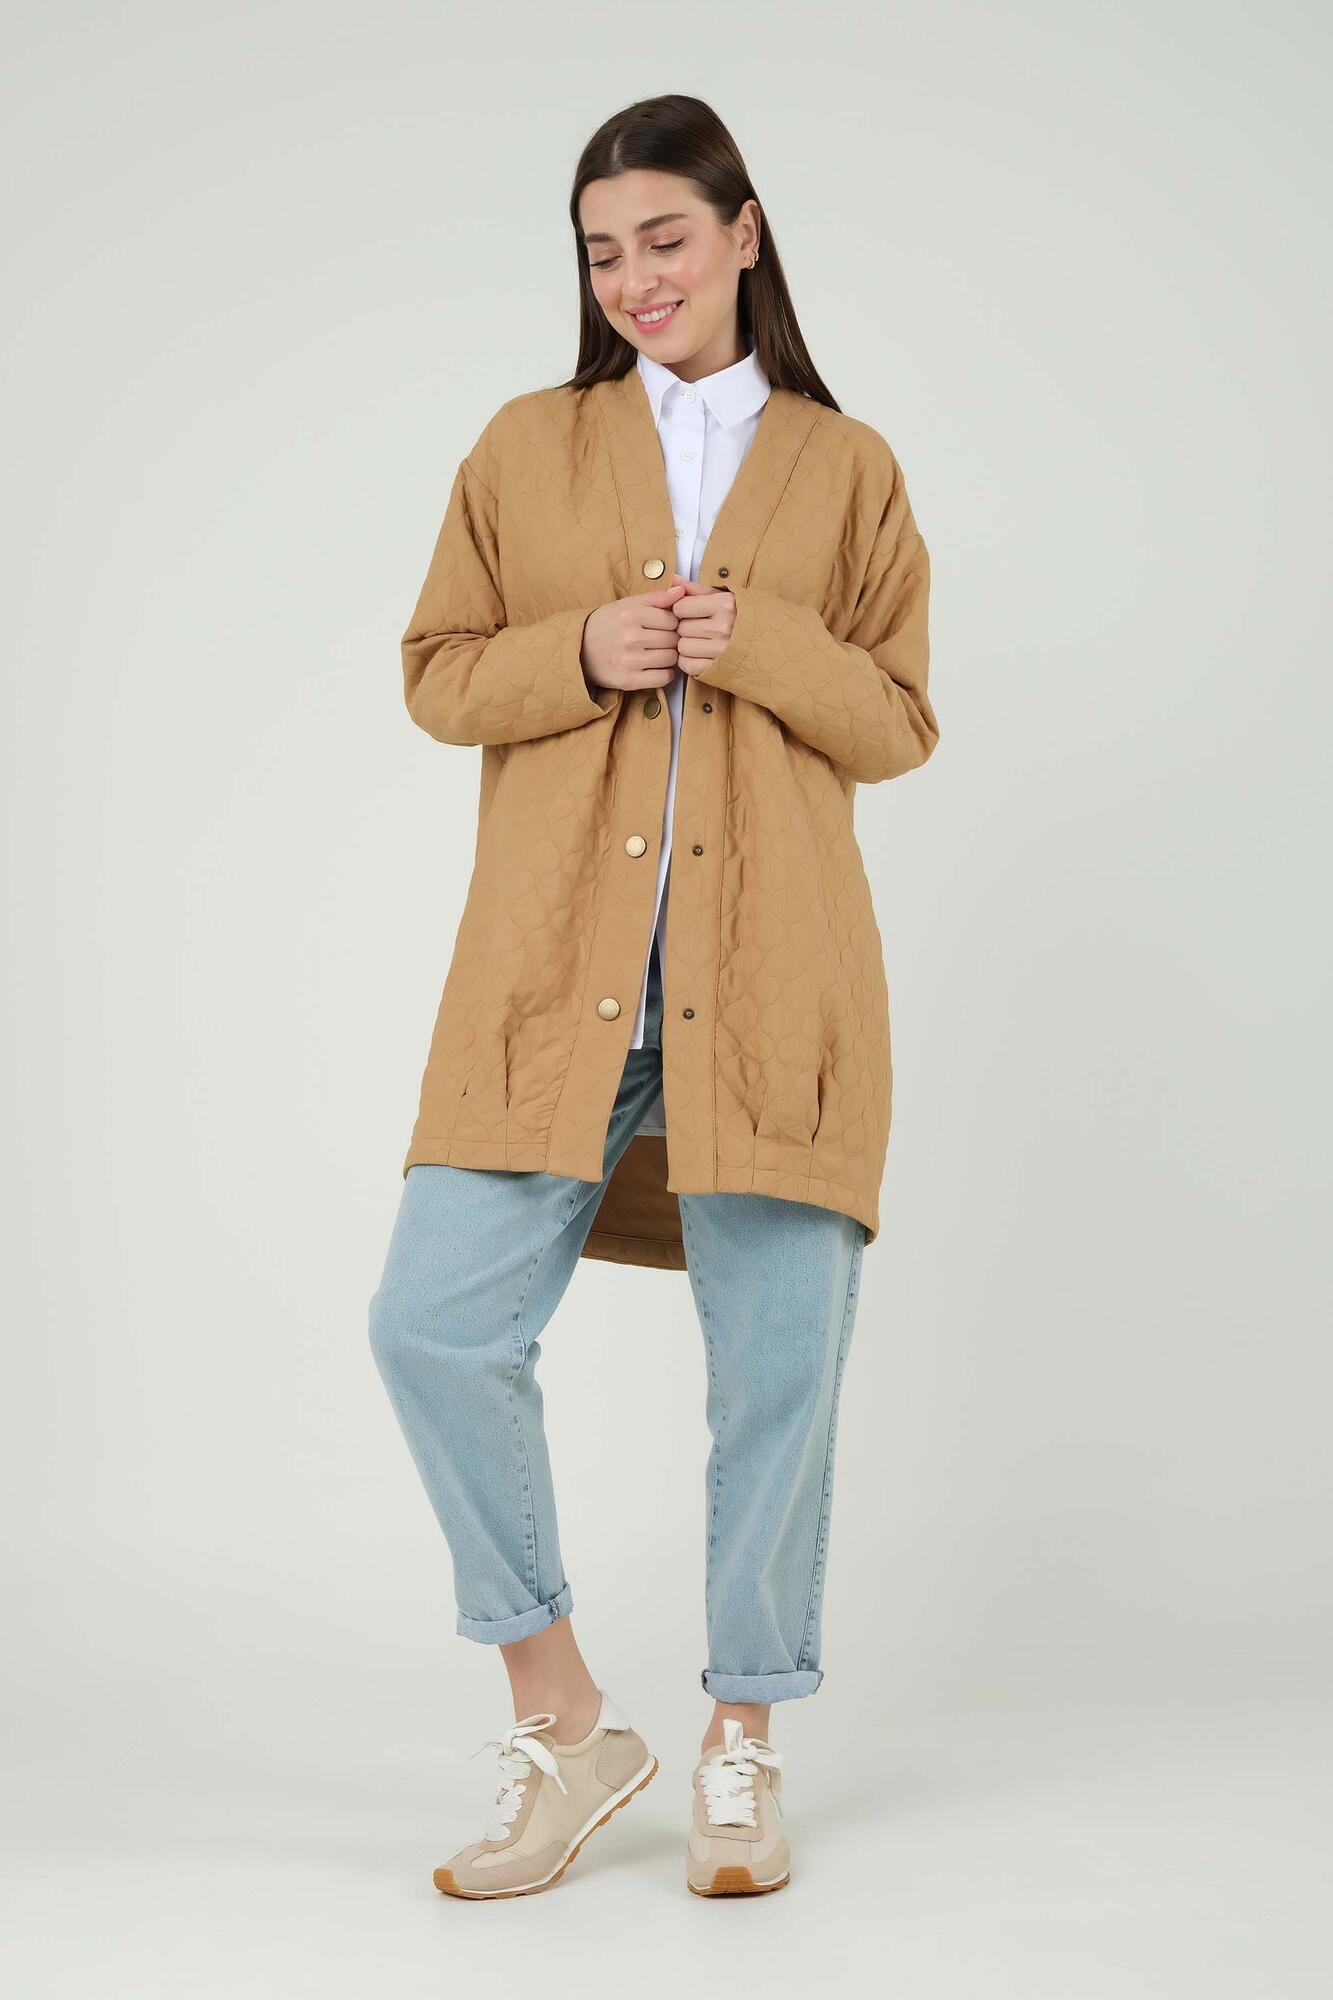 Pleated Skirt Hem Quilted Jacket Camel